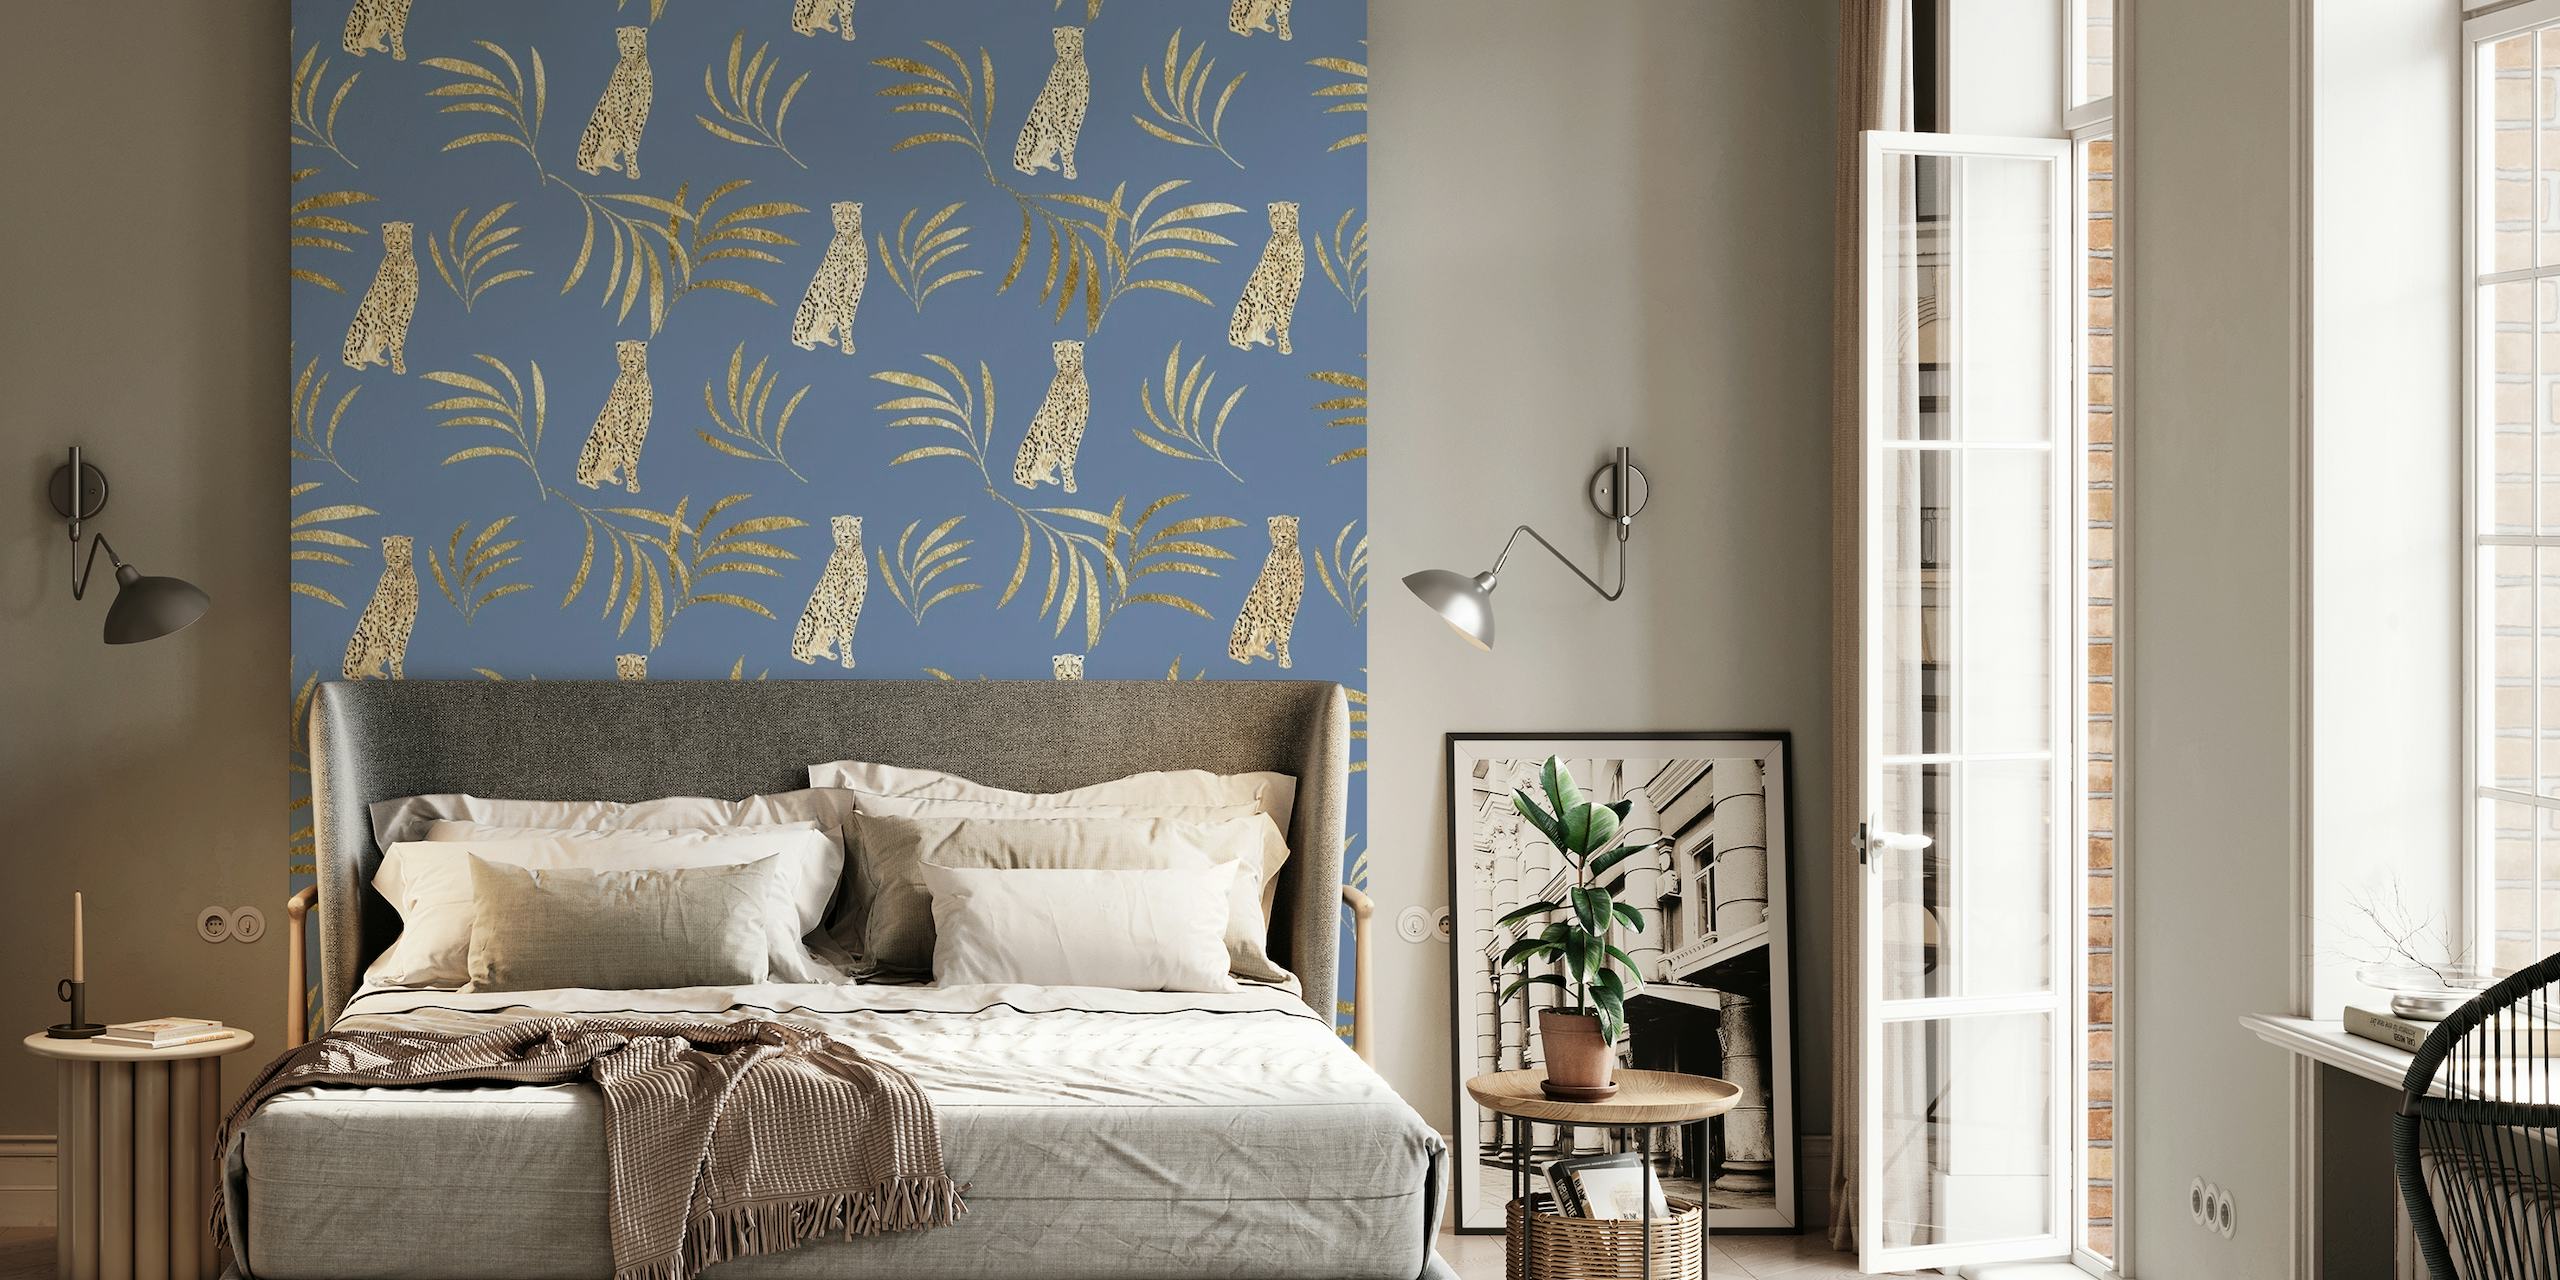 Cheetah and eucalyptus leaves wall mural in shades of gold and green on a deep blue background